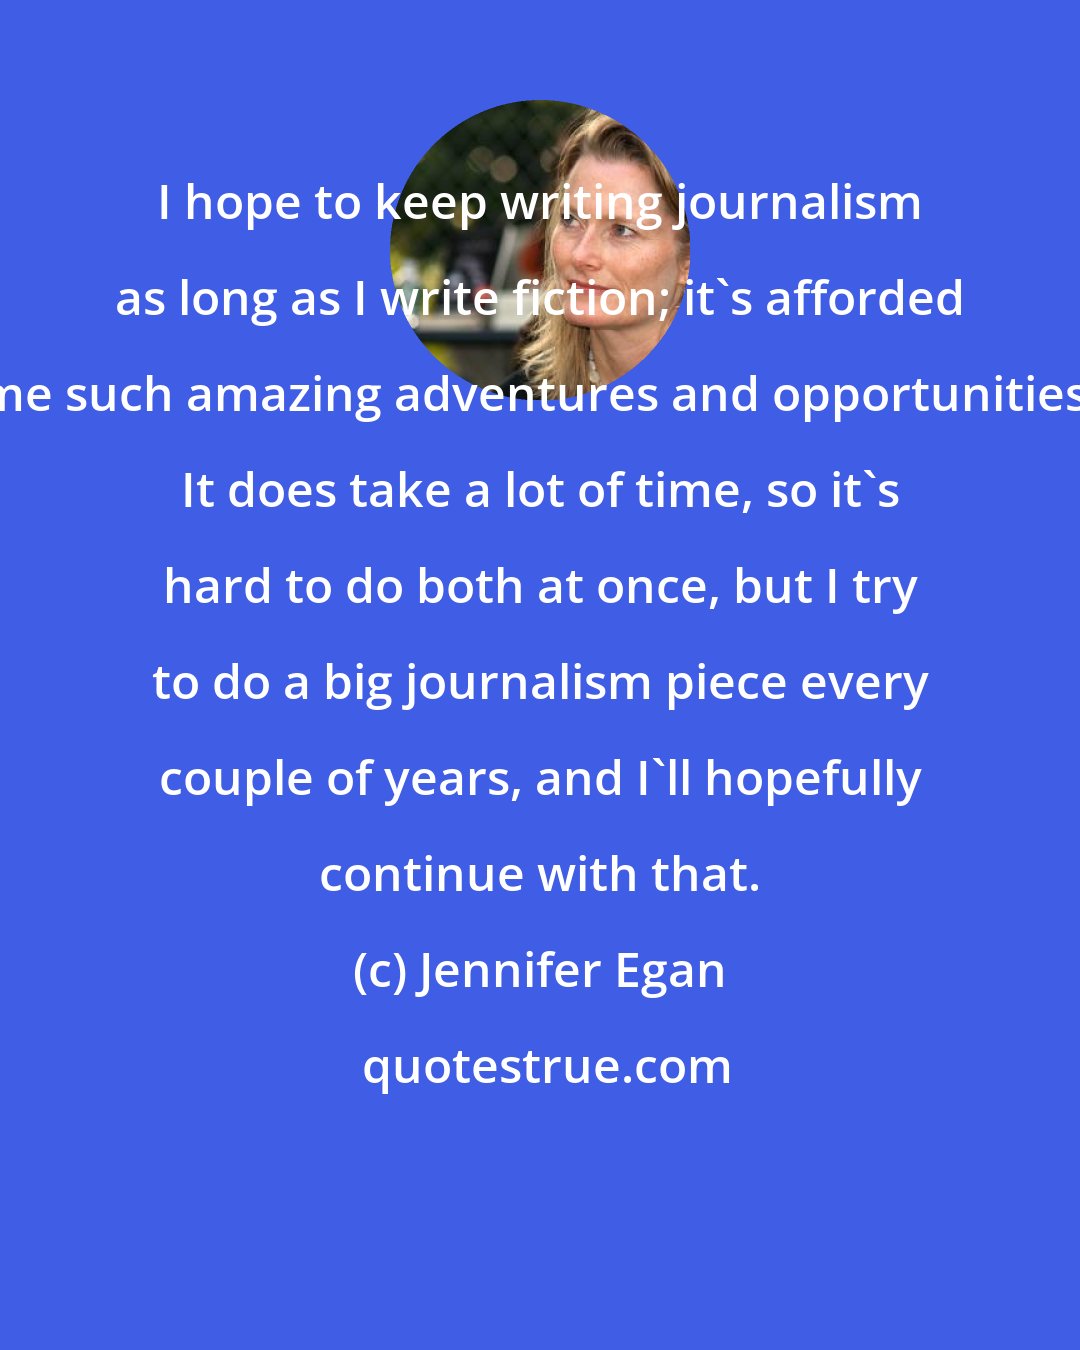 Jennifer Egan: I hope to keep writing journalism as long as I write fiction; it's afforded me such amazing adventures and opportunities. It does take a lot of time, so it's hard to do both at once, but I try to do a big journalism piece every couple of years, and I'll hopefully continue with that.